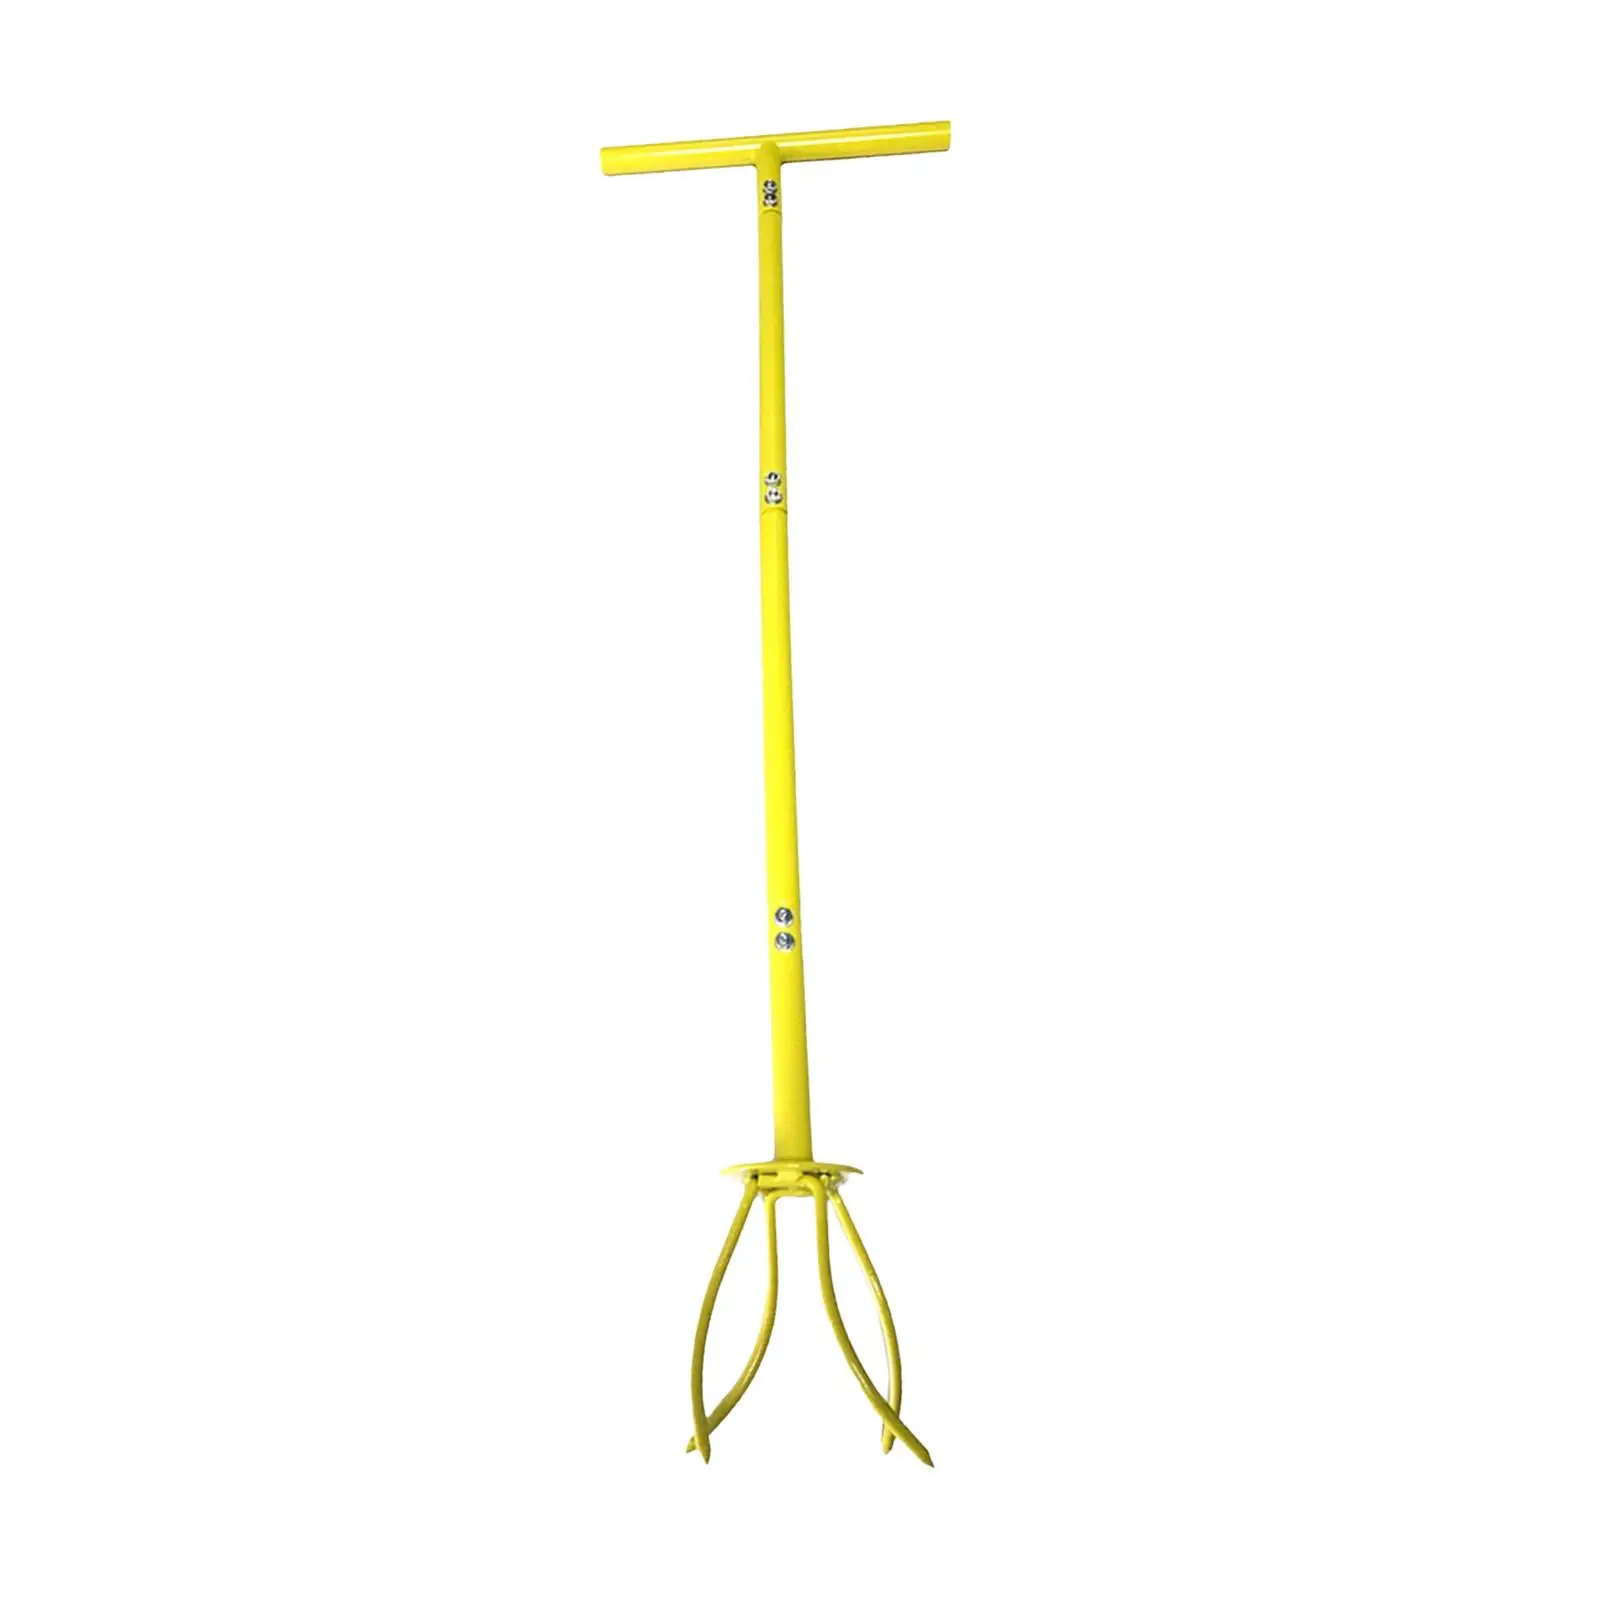 Manual Hand Tiller Heavy Duty No Bending Rust Resistant with A Removable Big Claw with Adjustable Shaft Twist Tiller